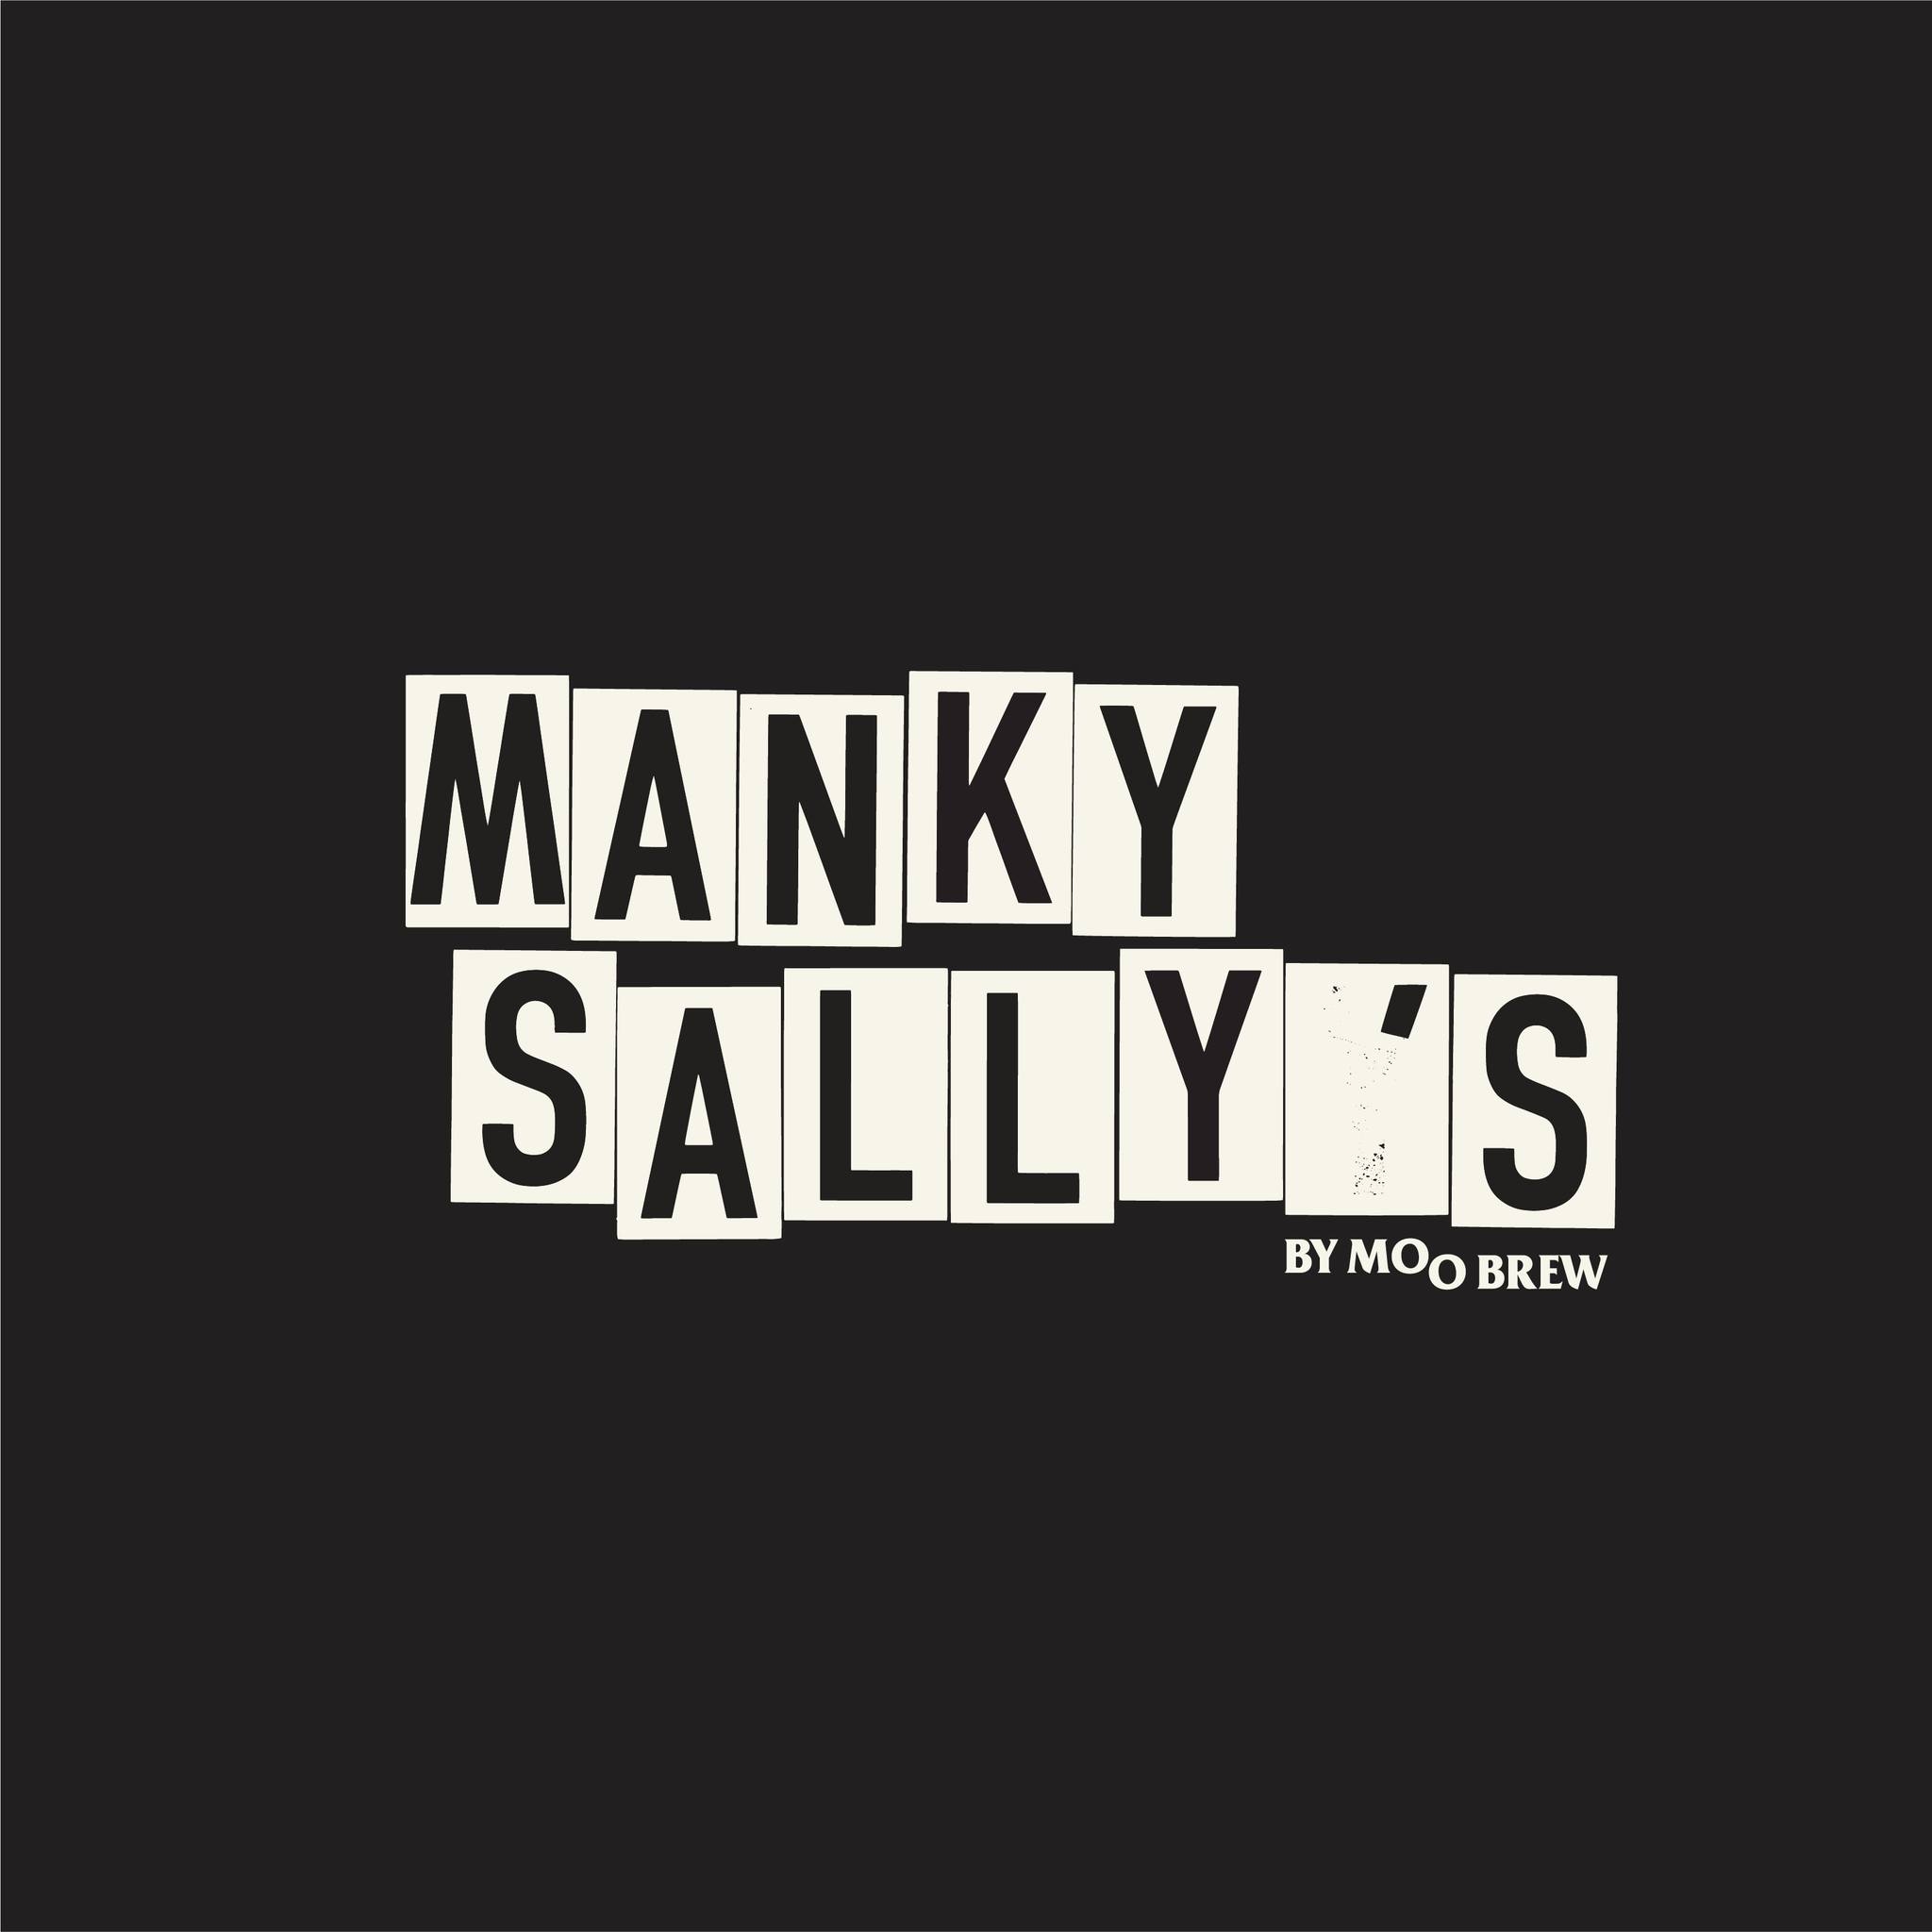 Manky Sally’s by Moo Brew